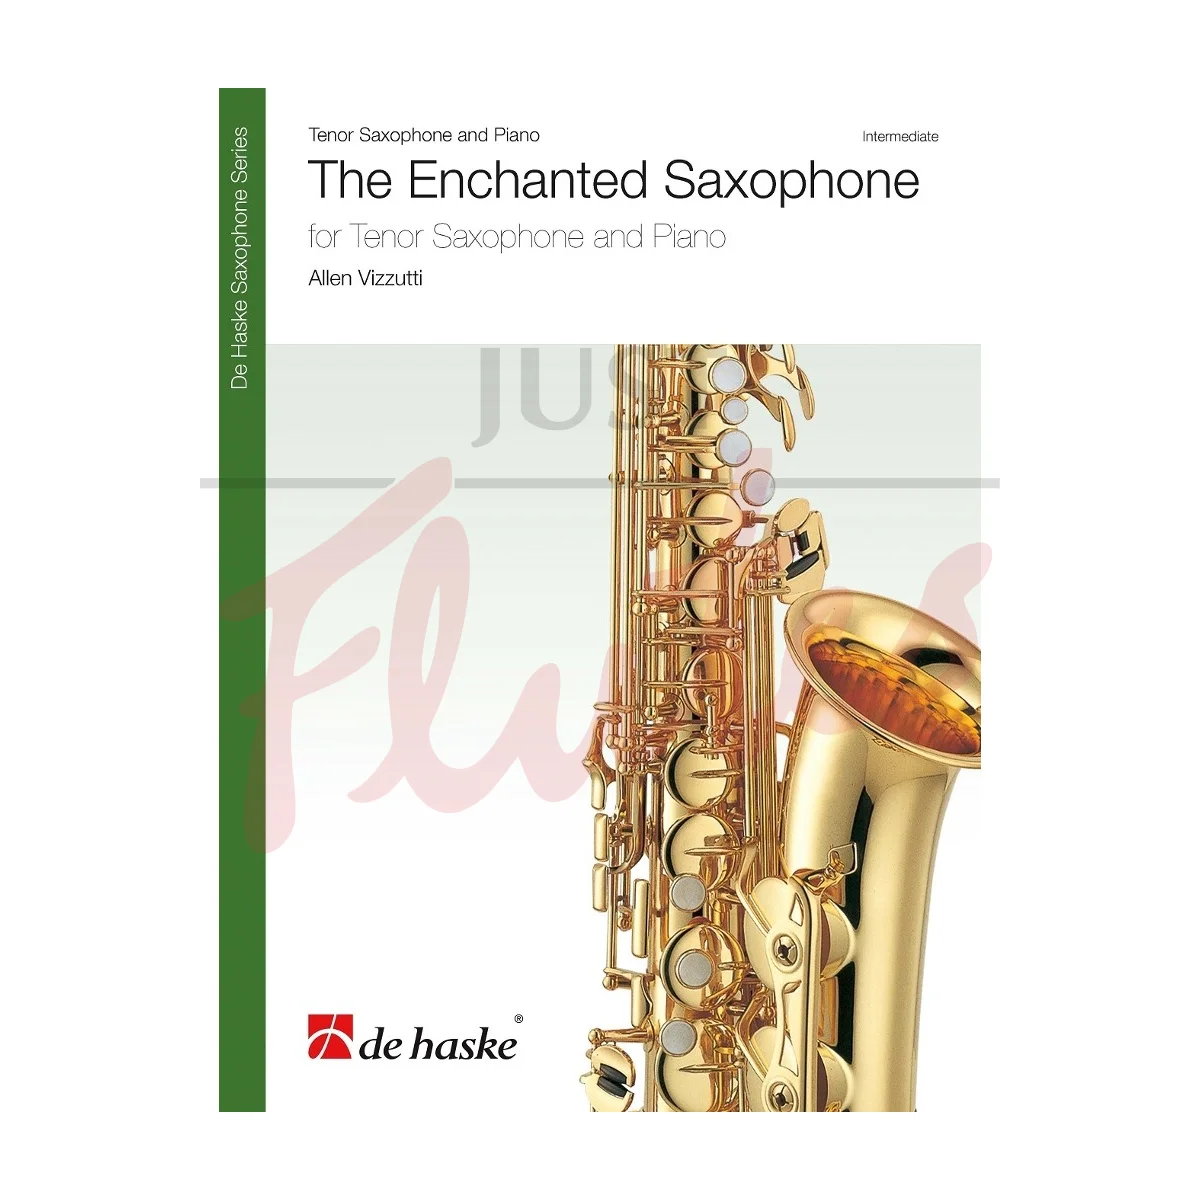 The Enchanted Saxophone for Tenor Saxophone and Piano